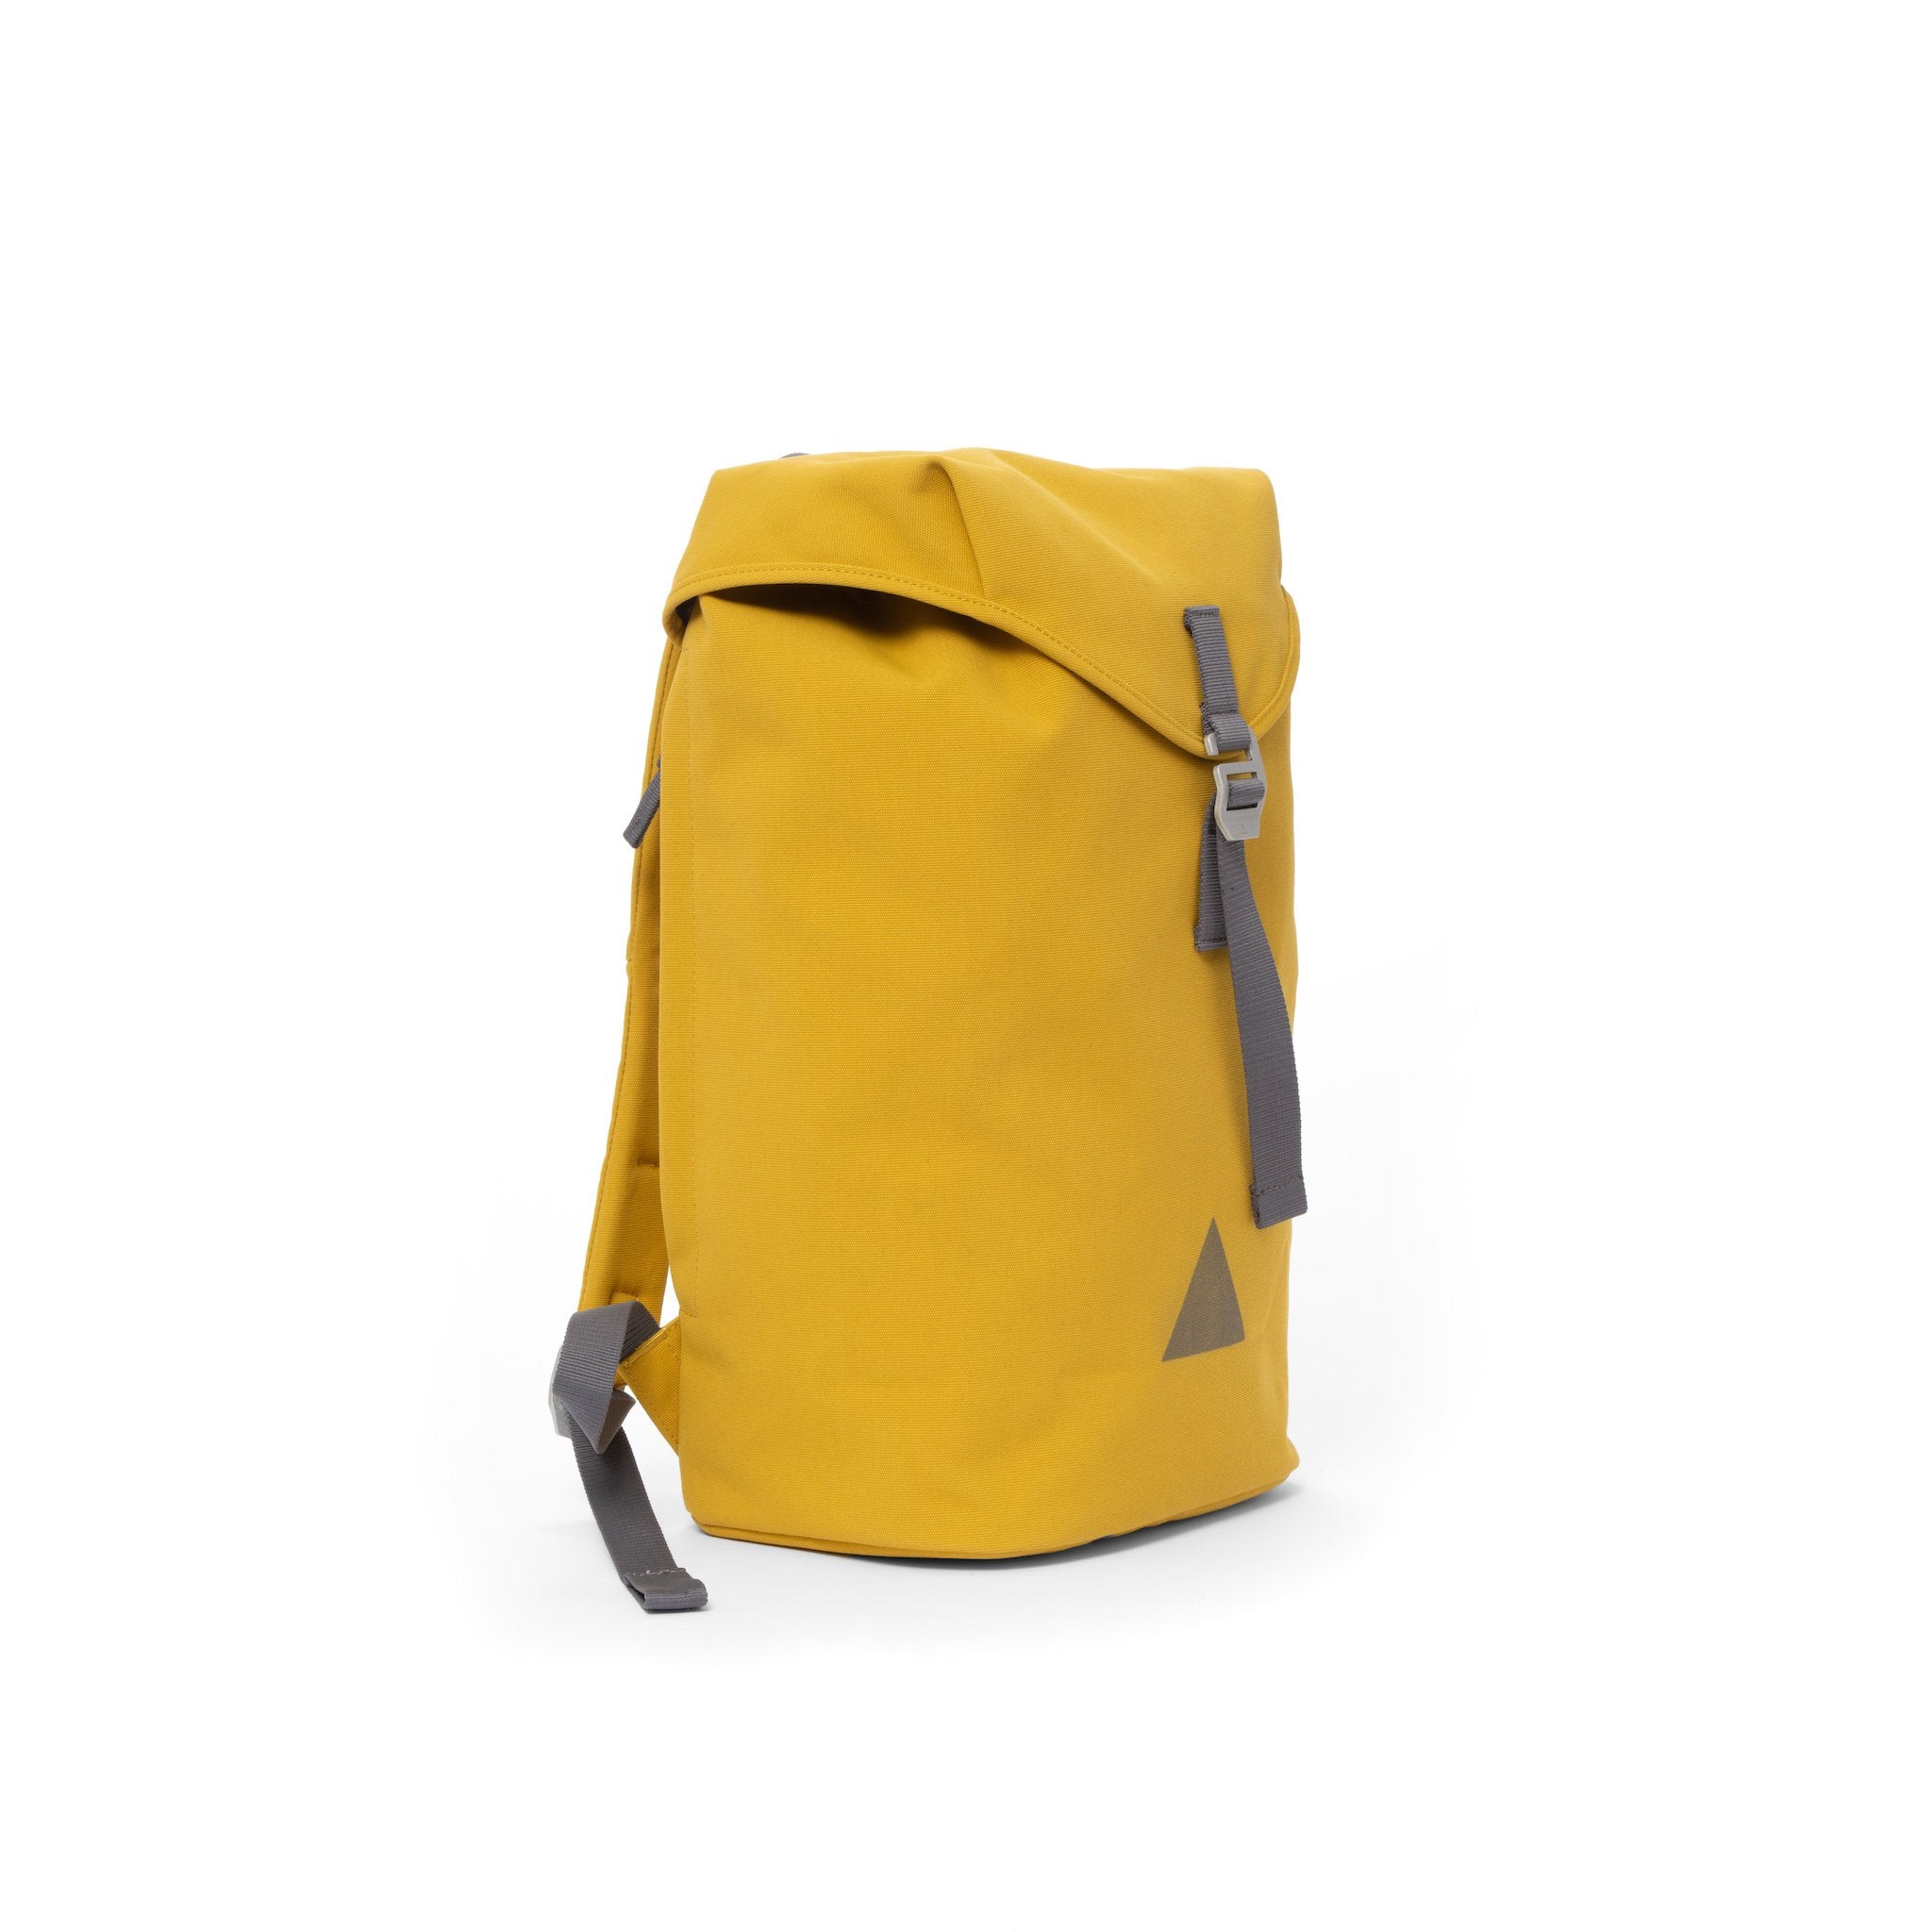 Yellow recycled canvas backpack with strap closure and metal buckle.